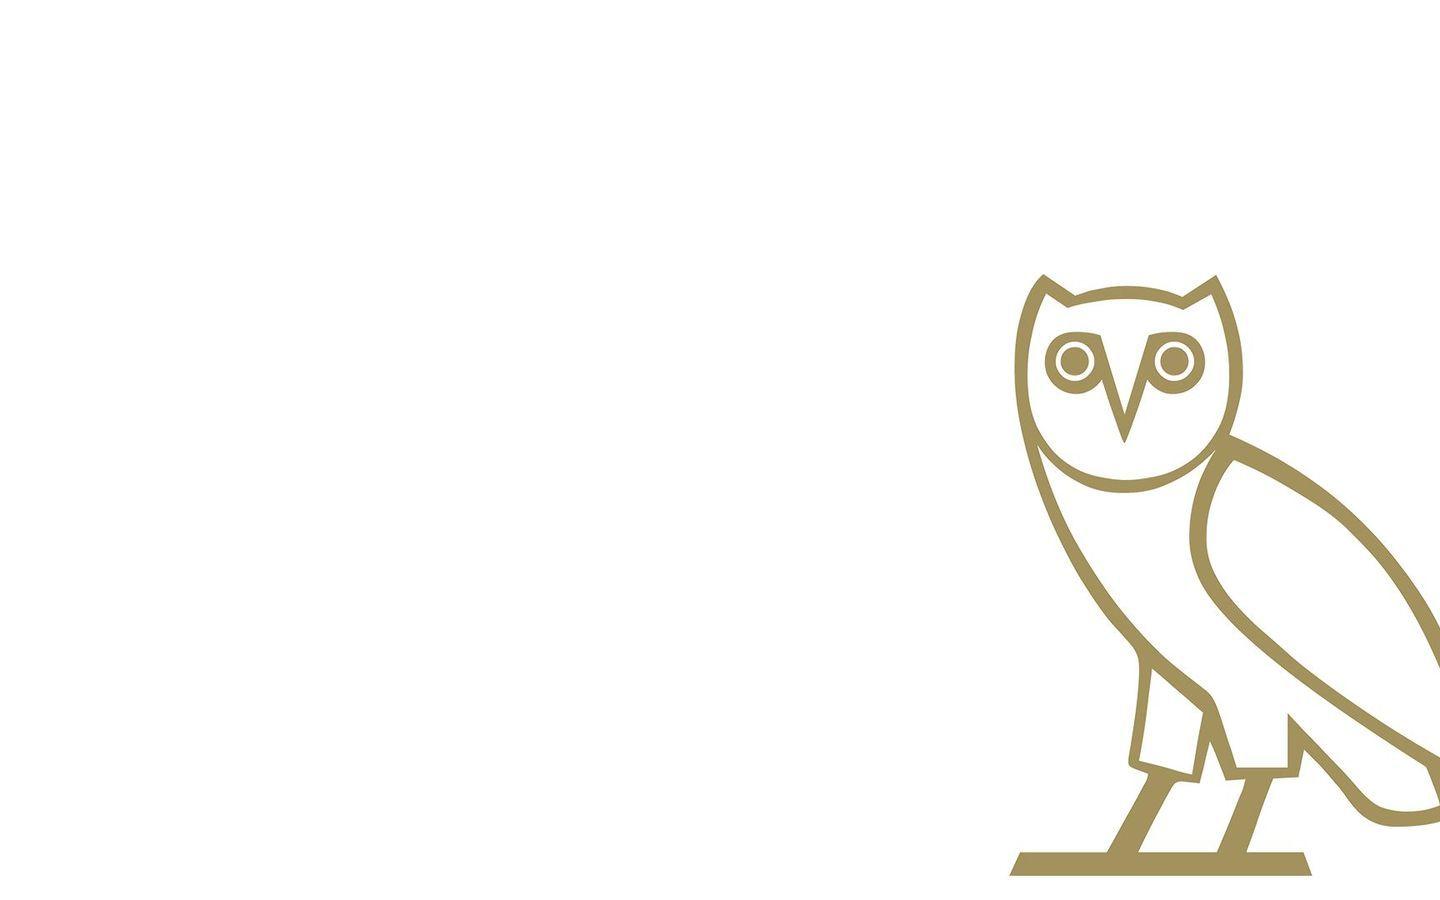 Ovo Logo Wallpapers Wallpaper Cave New drake owl wallpaper hd on your desktop or gadget. ovo logo wallpapers wallpaper cave